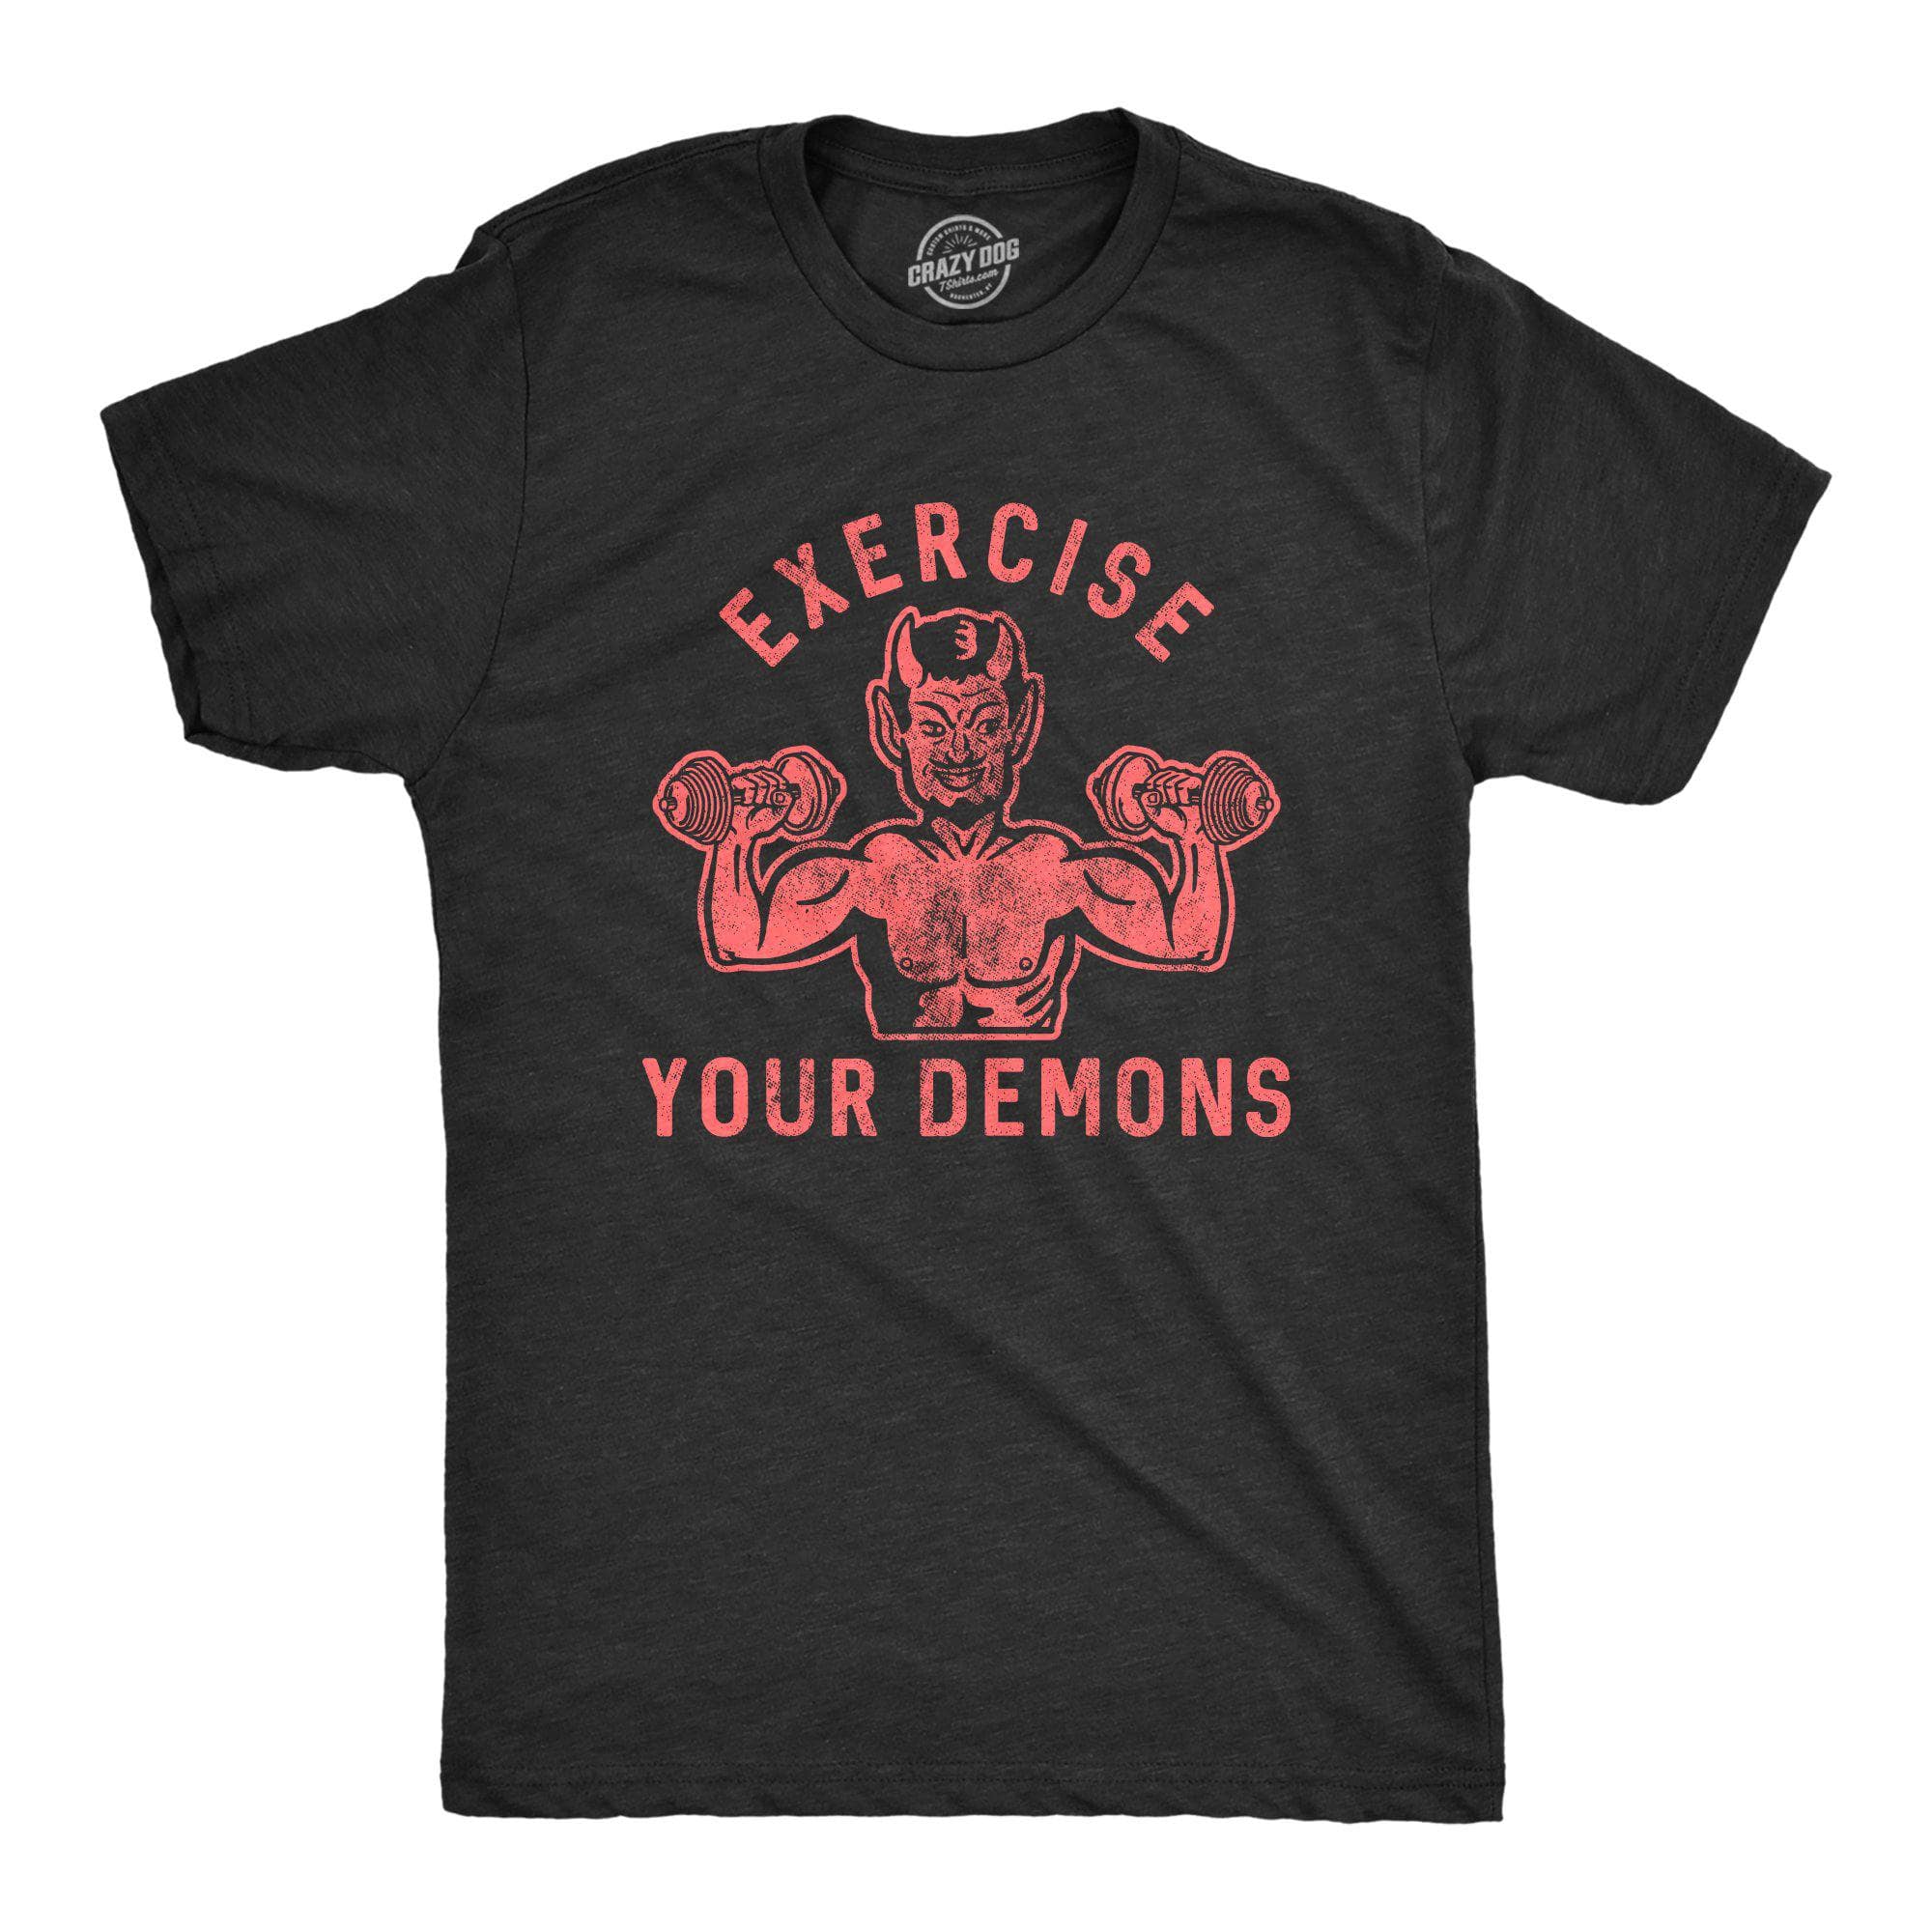 Exercise Your Demons Men's Tshirt - Crazy Dog T-Shirts